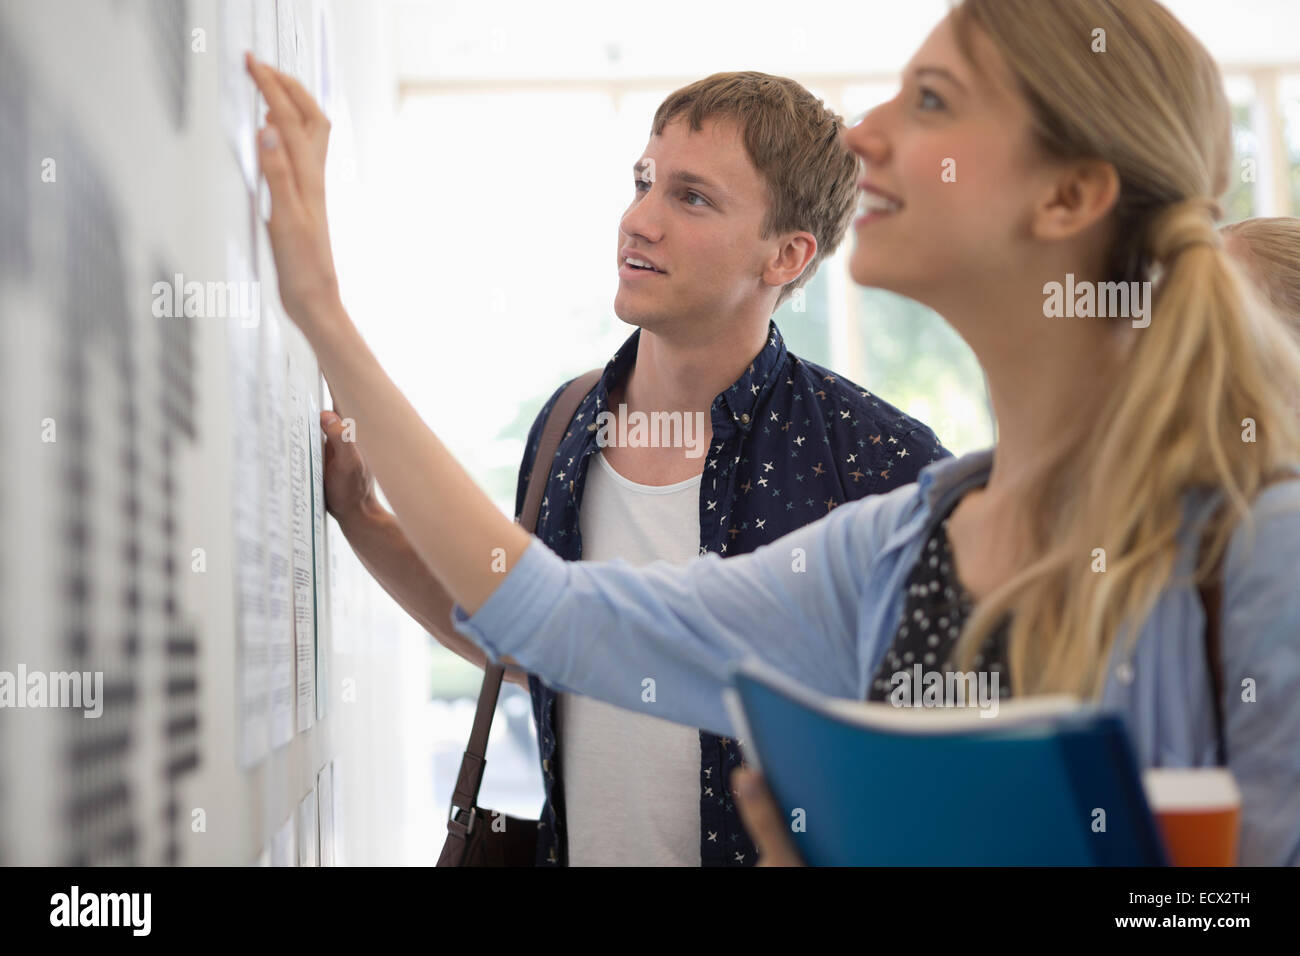 University students looking at test results in corridor Stock Photo